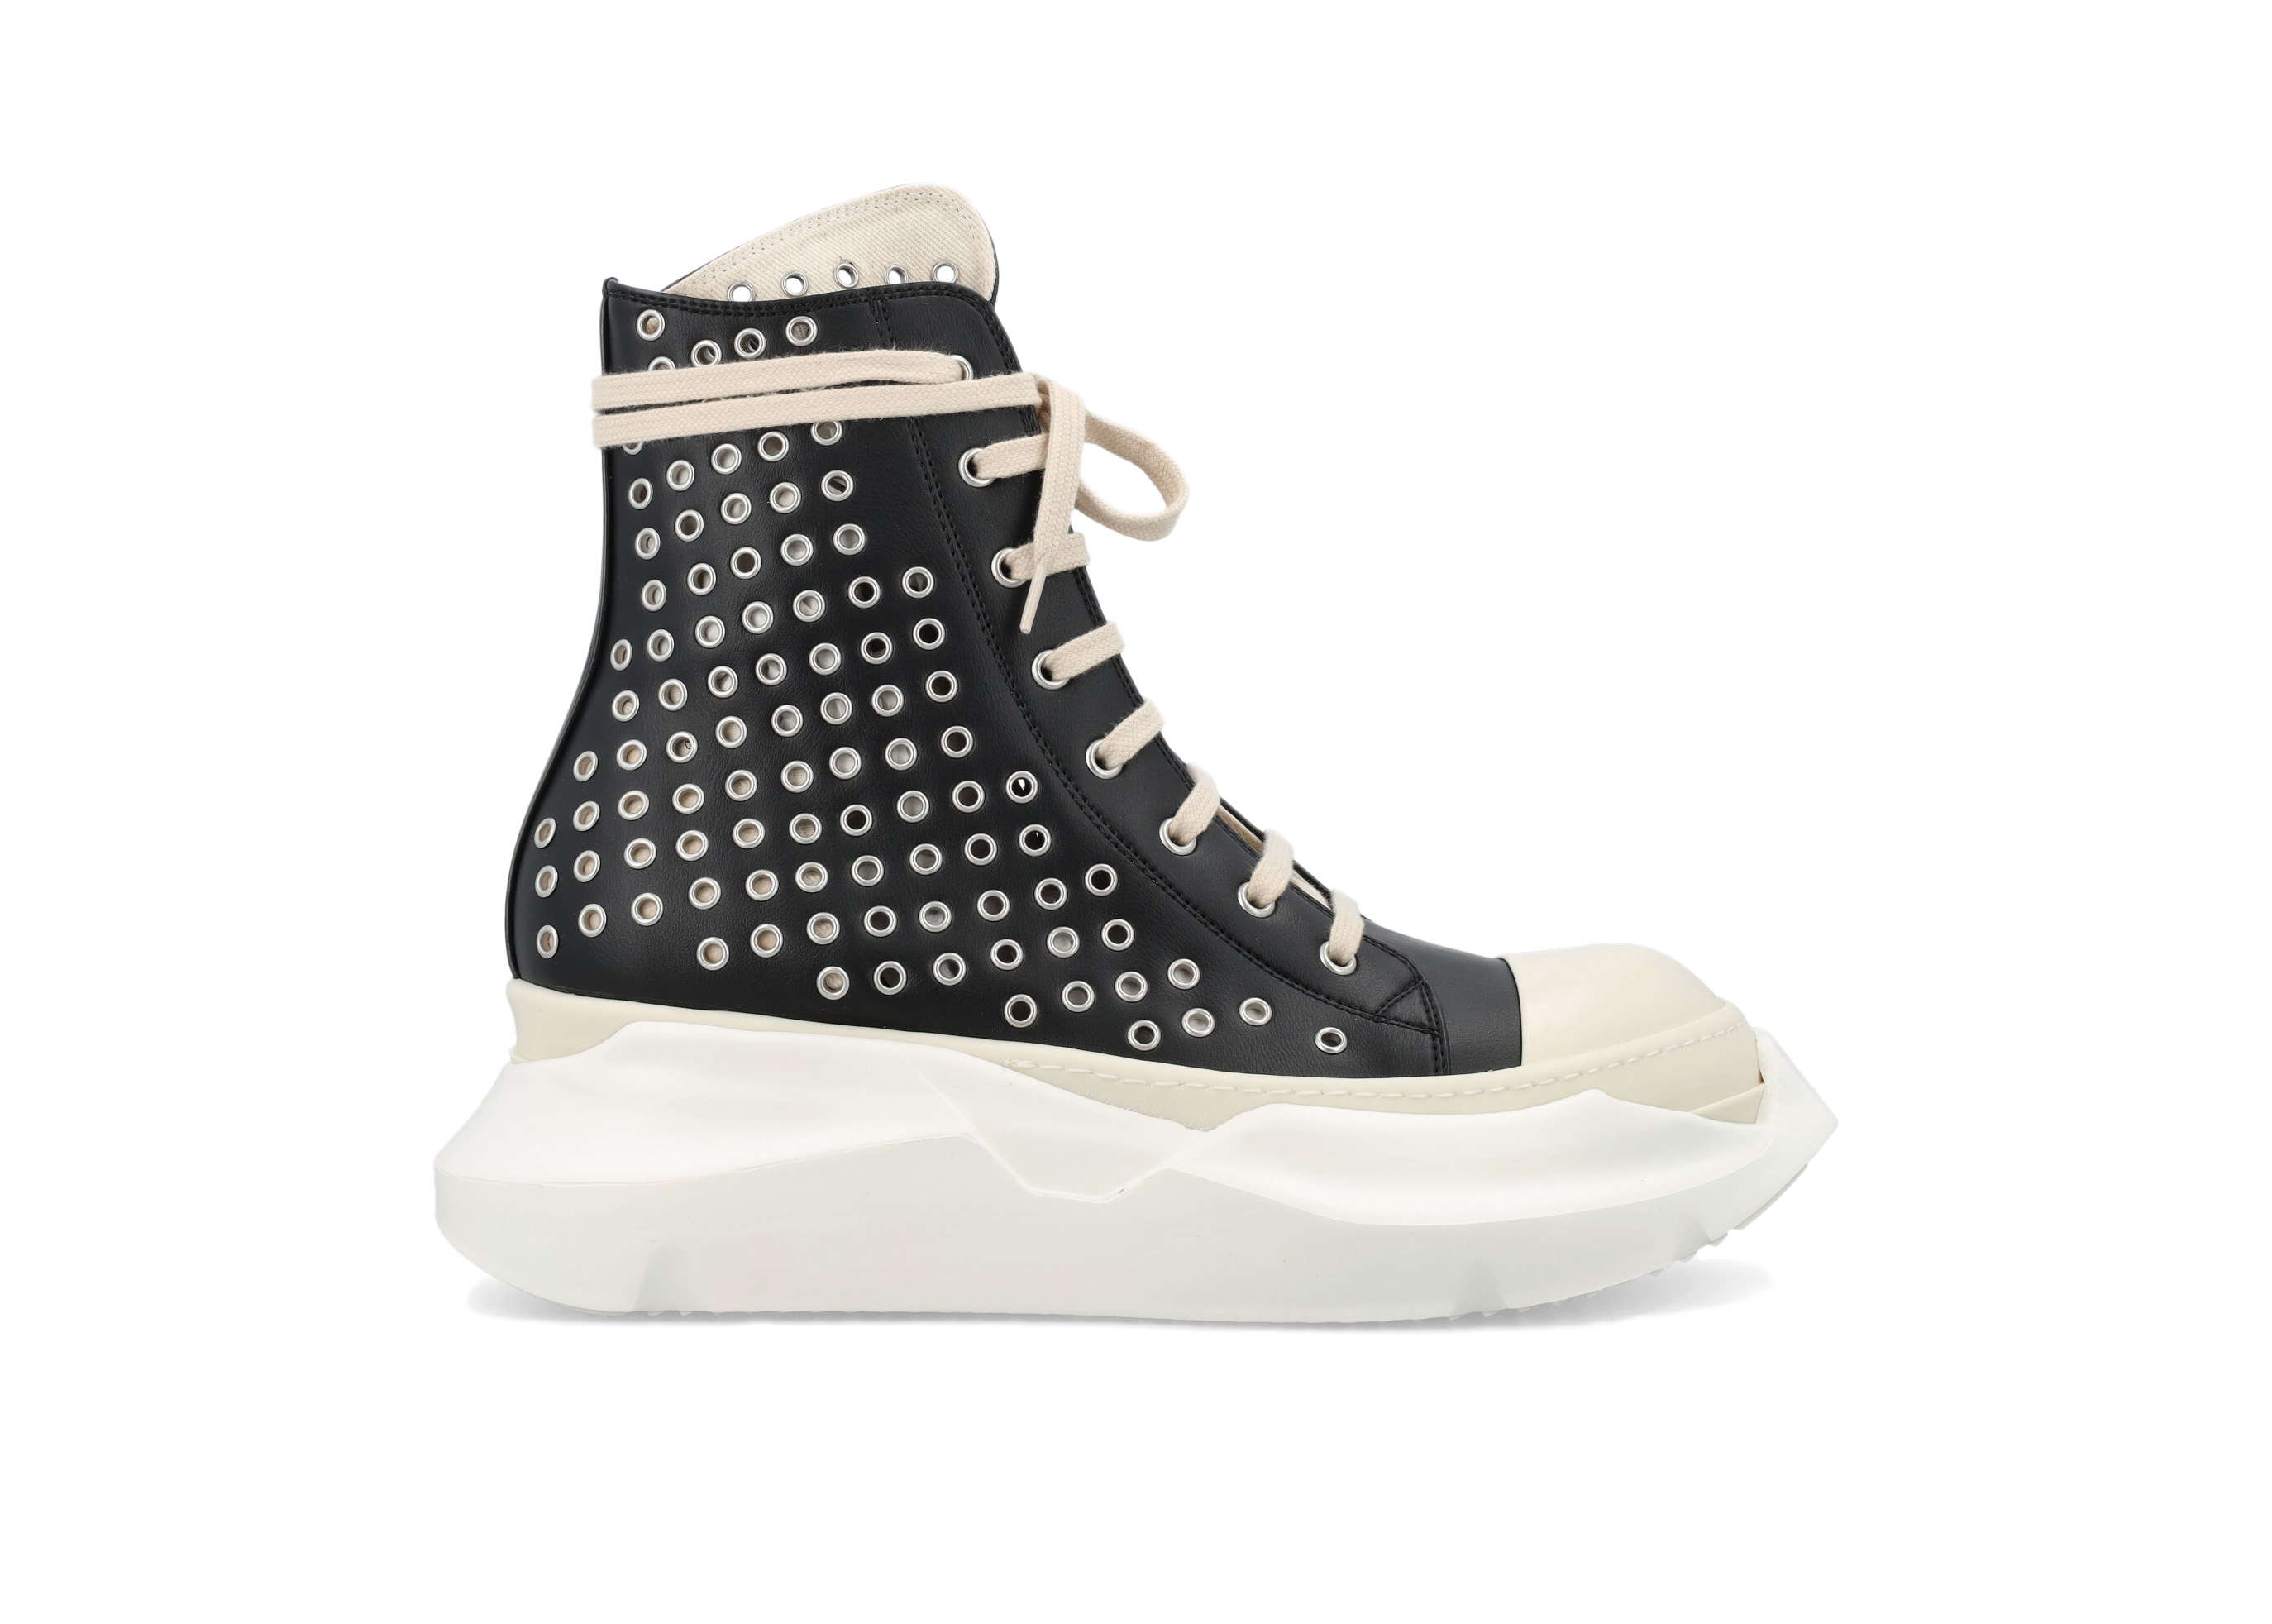 Rick Owens DRKSHDW Abstract High Top Black